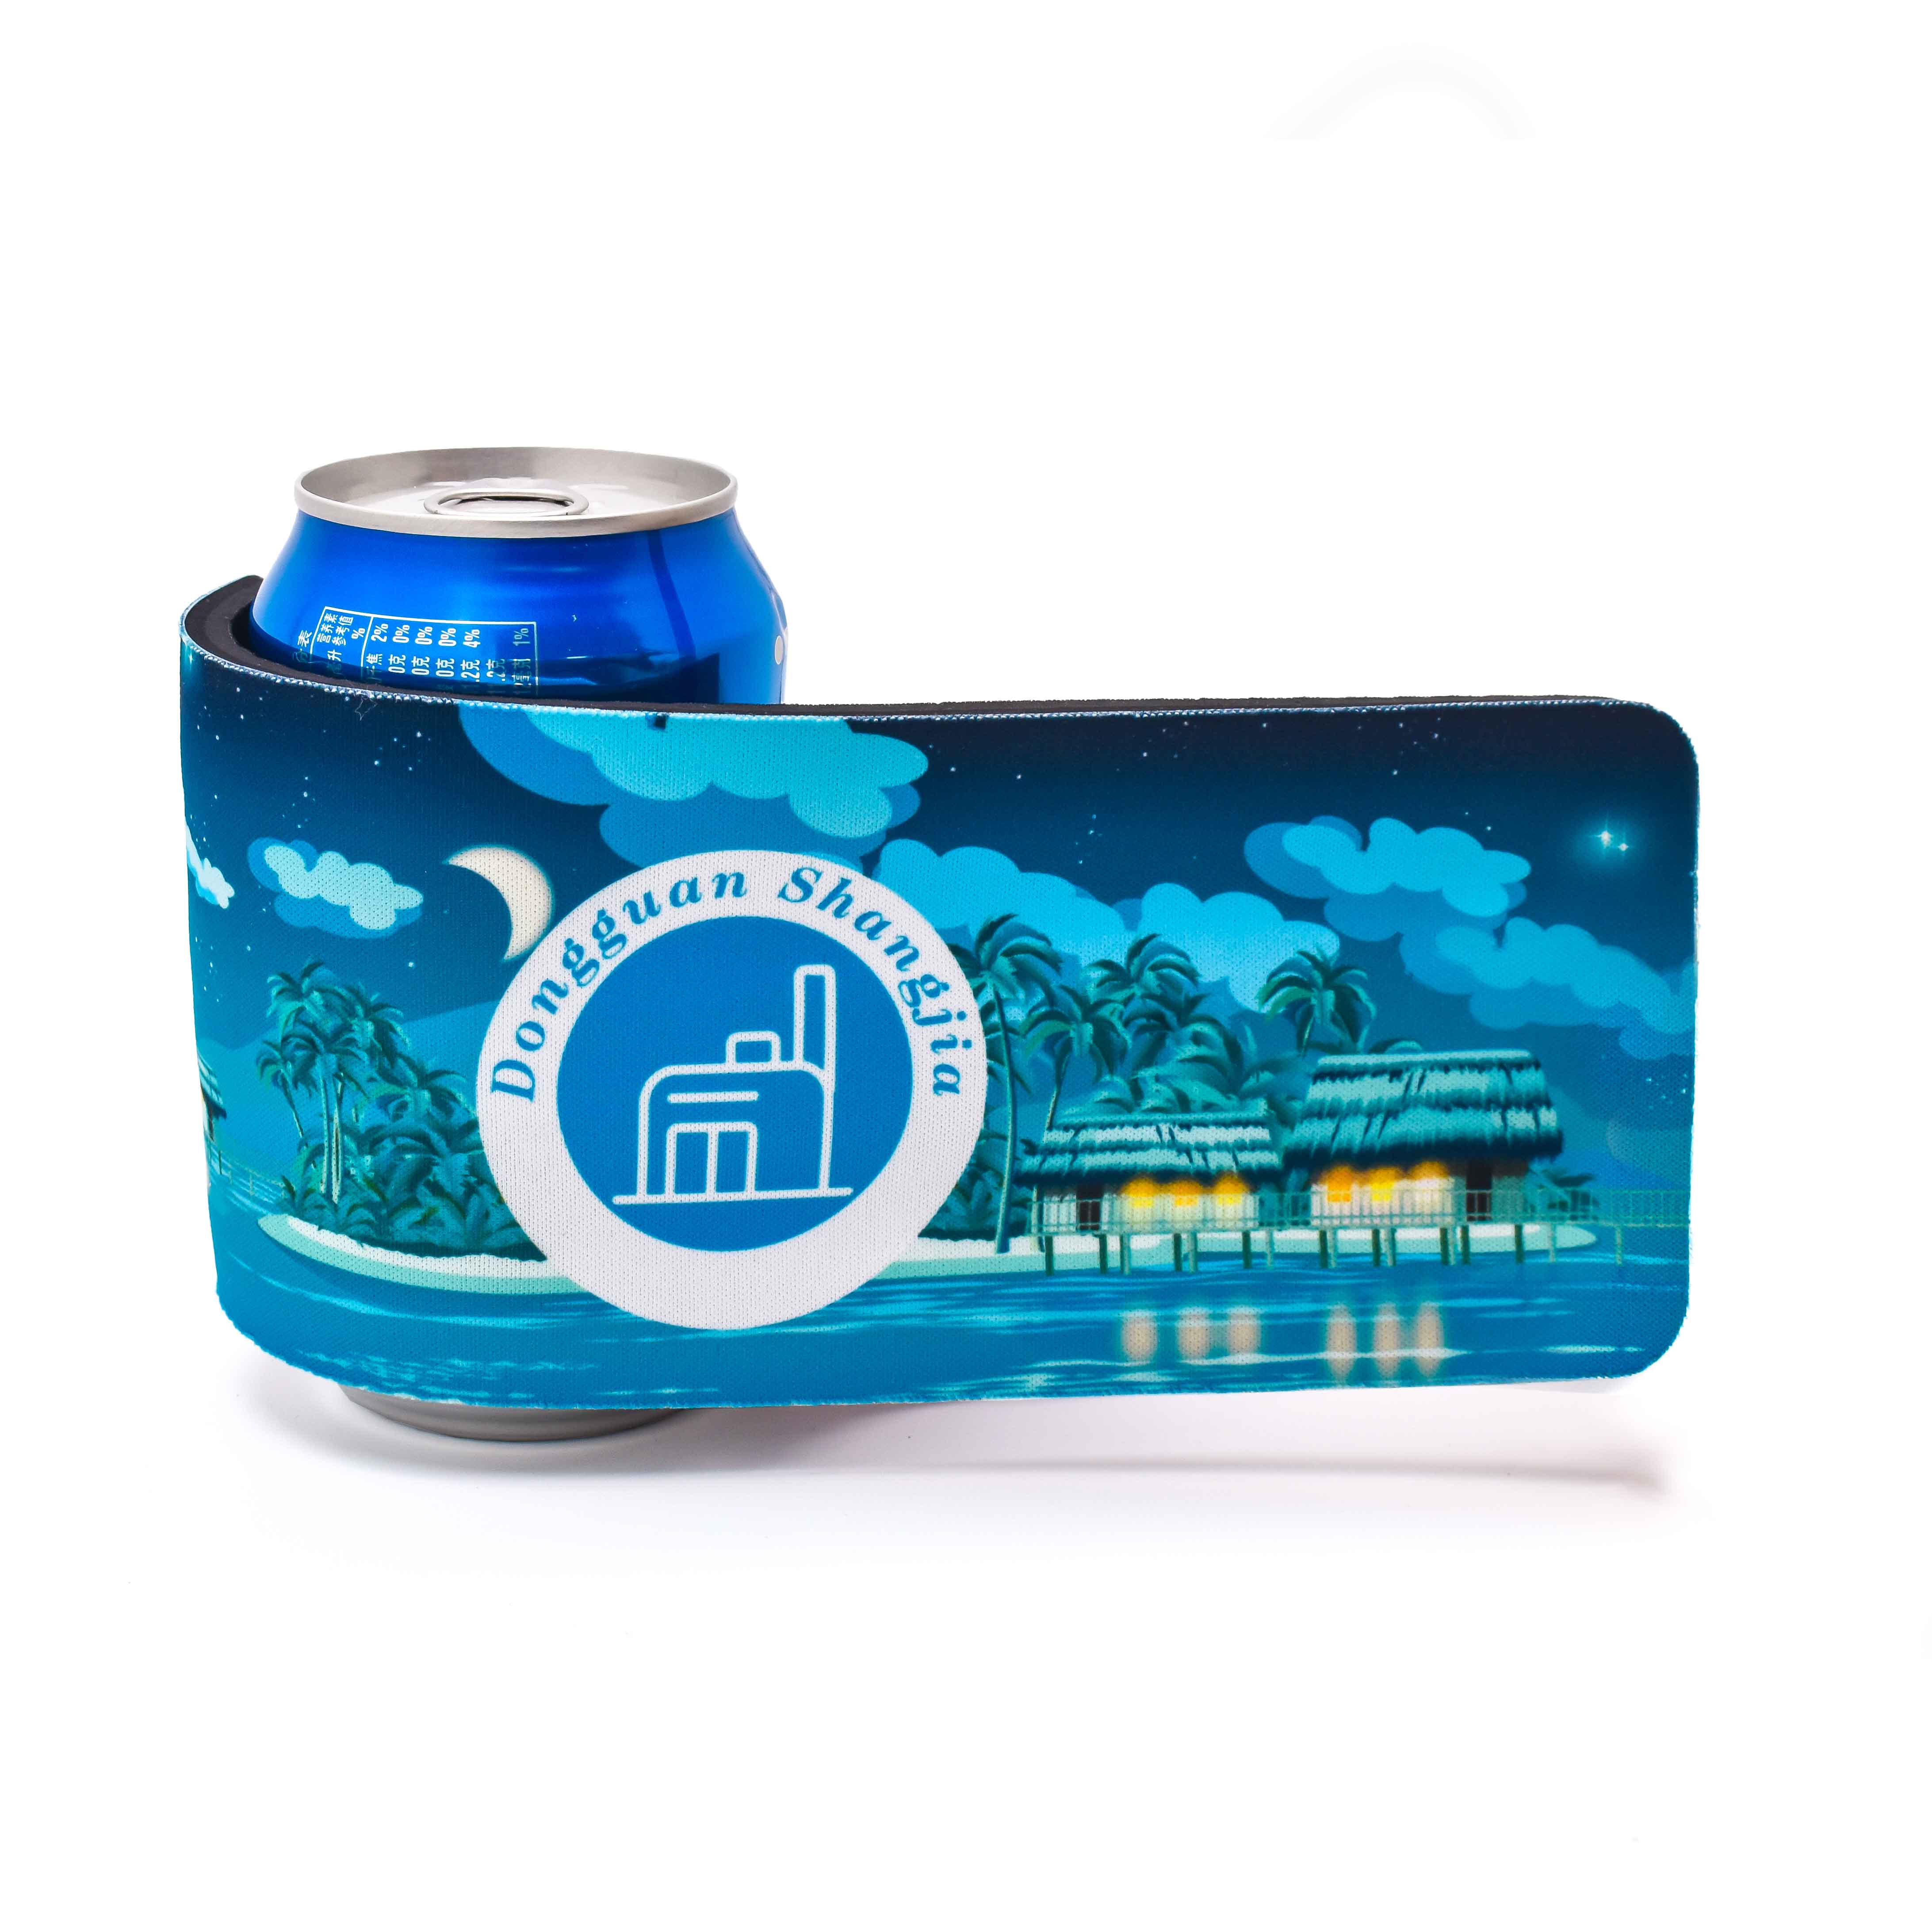 Slap can cooler, a stylish and eco-friendly product